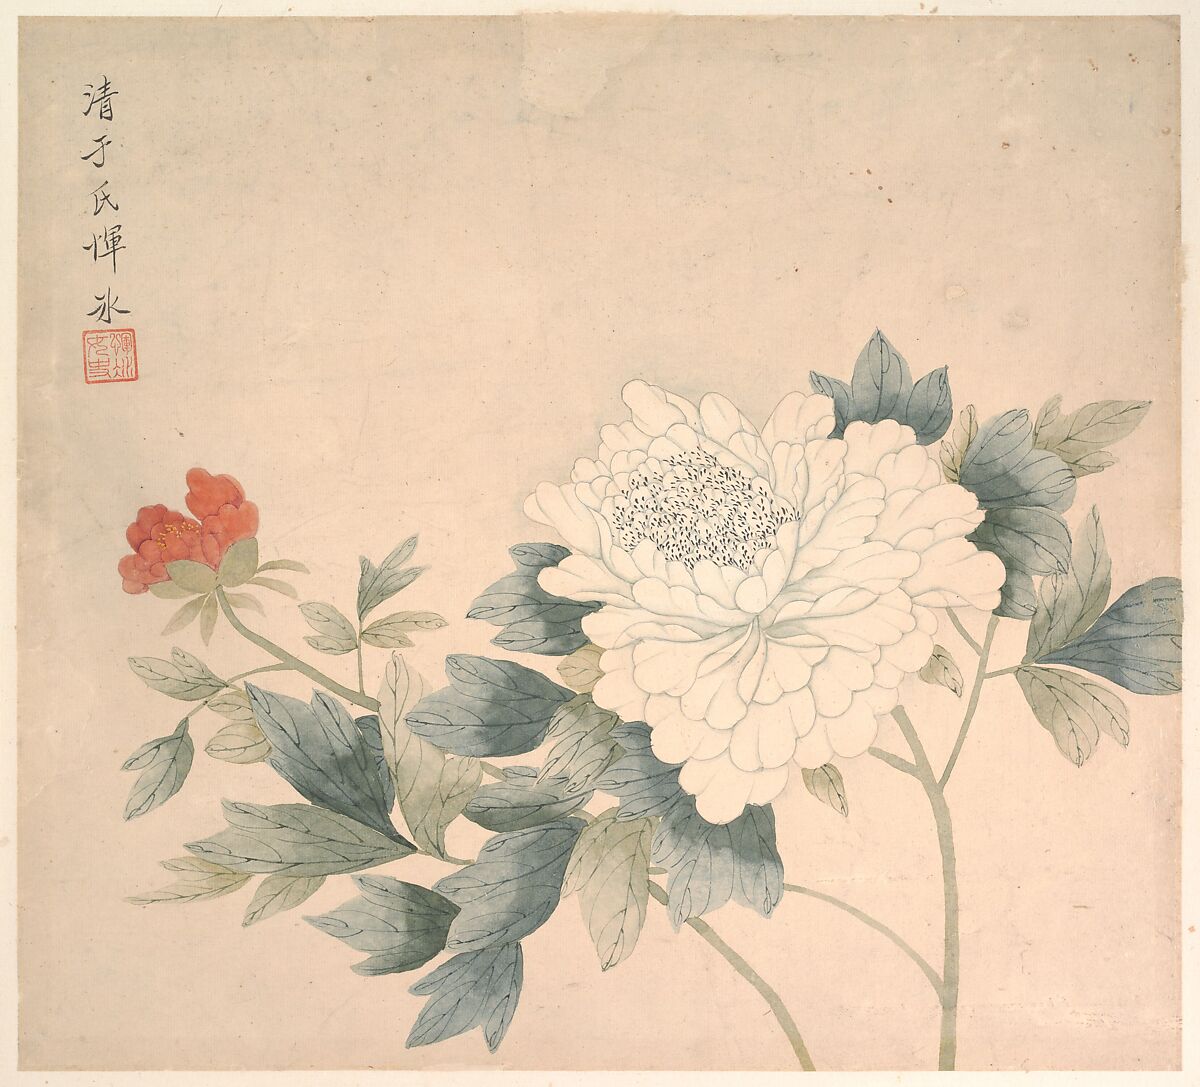 Flower Study, Yun Bing (Chinese, active late 17th– early 18th century), Album leaf; ink and color on paper, China 